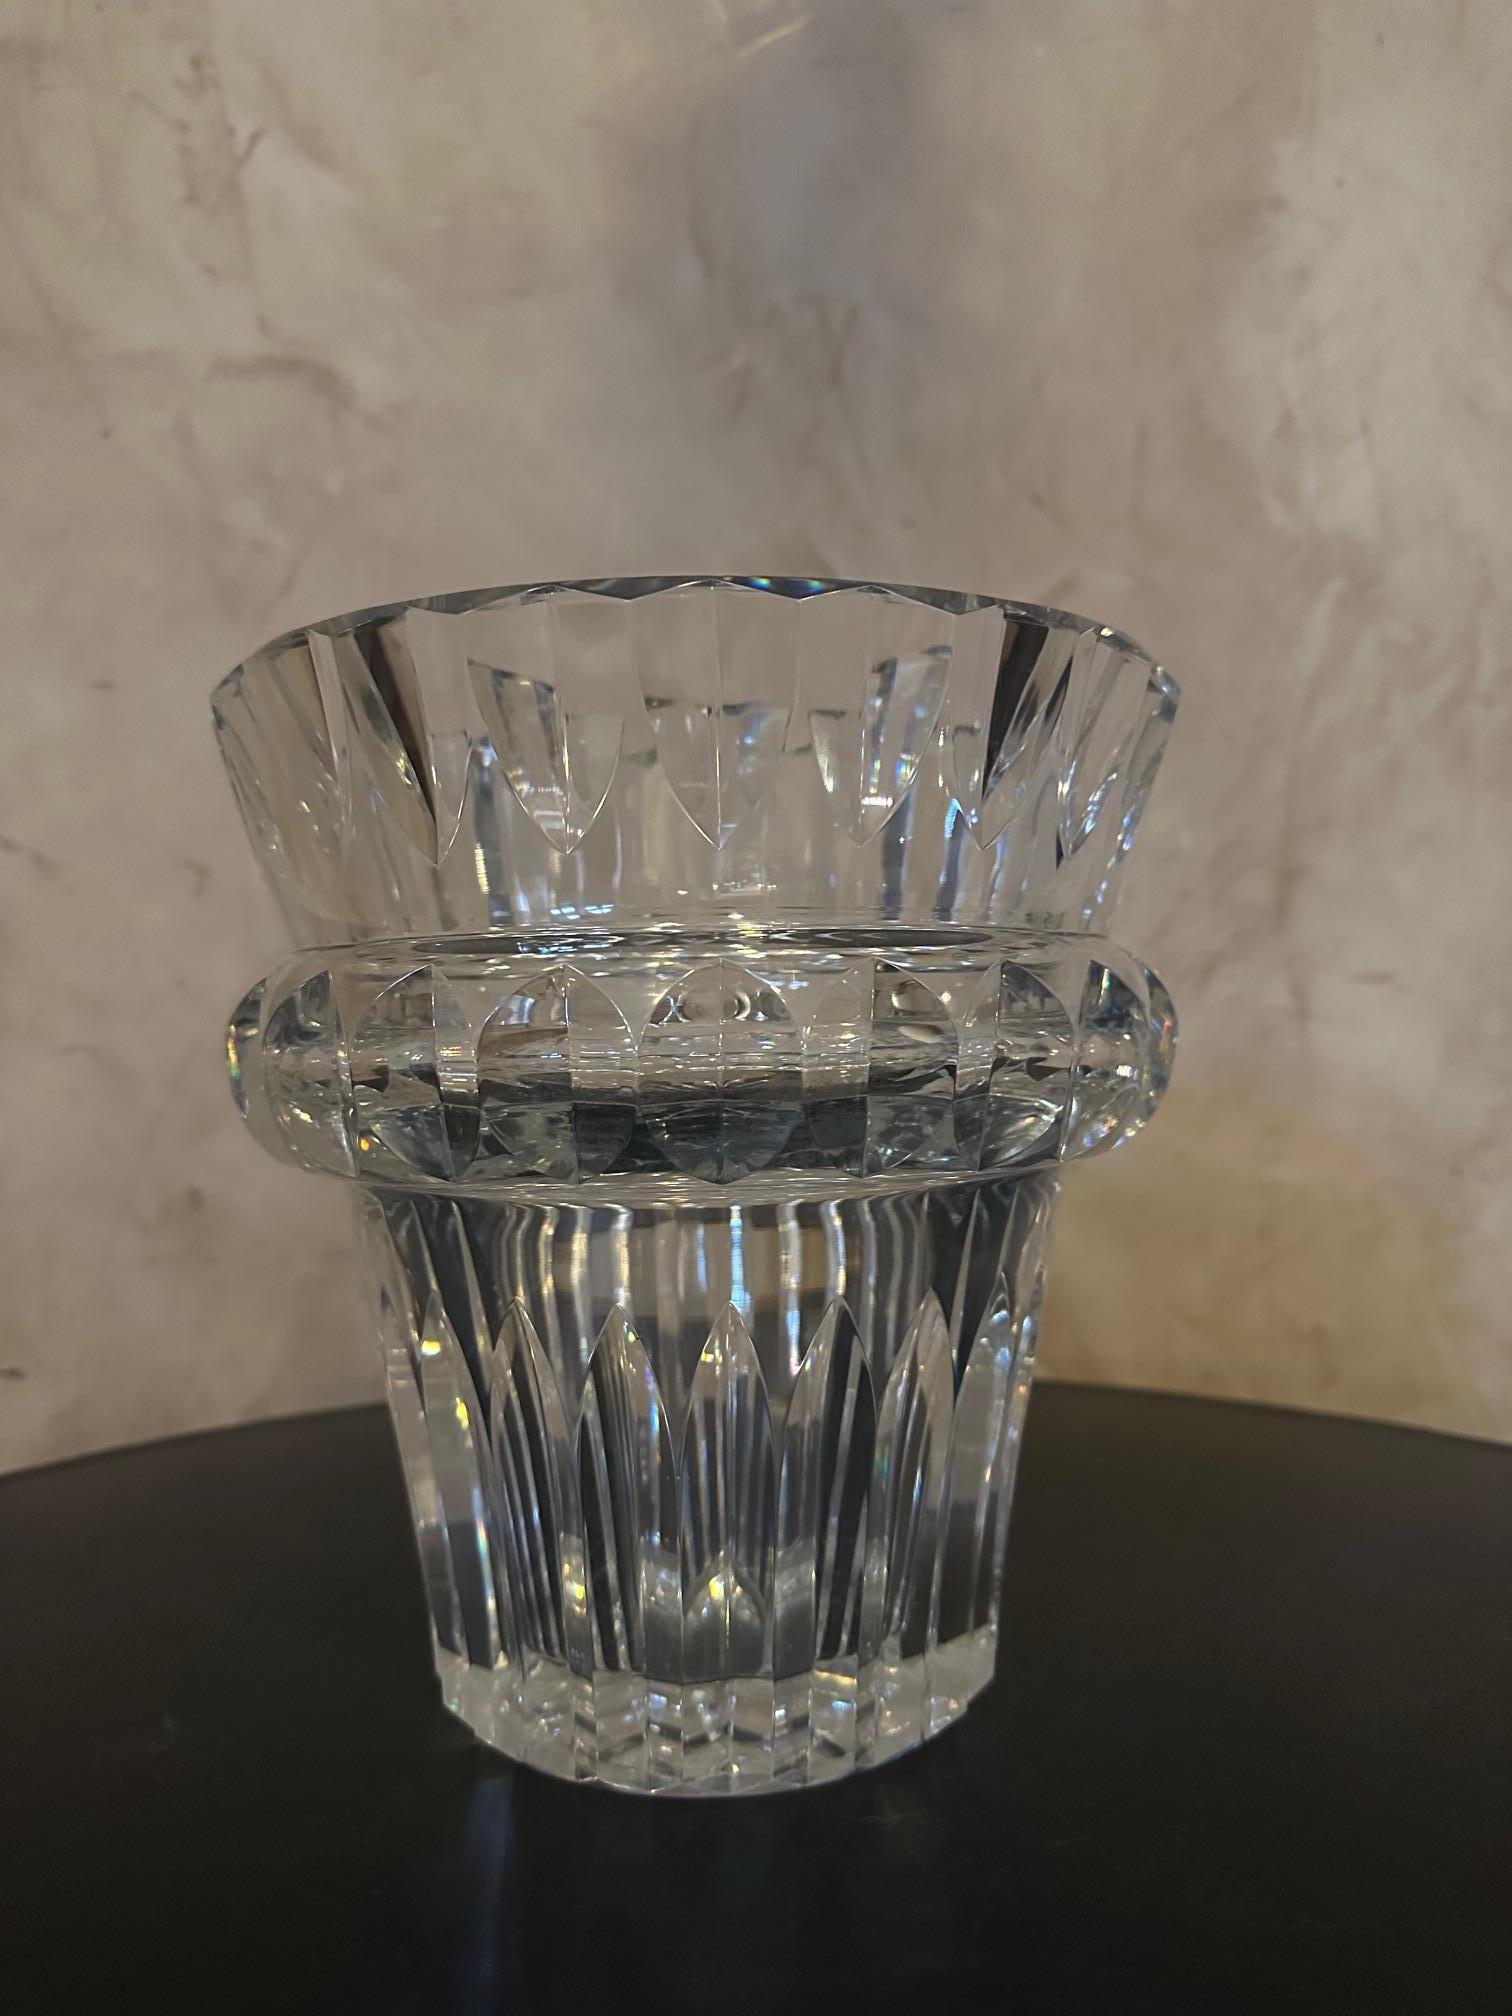 Very beautiful large Baccarat vase from the 1950s in engraved crystal.
Stamp of Baccarat below. Very nice quality.